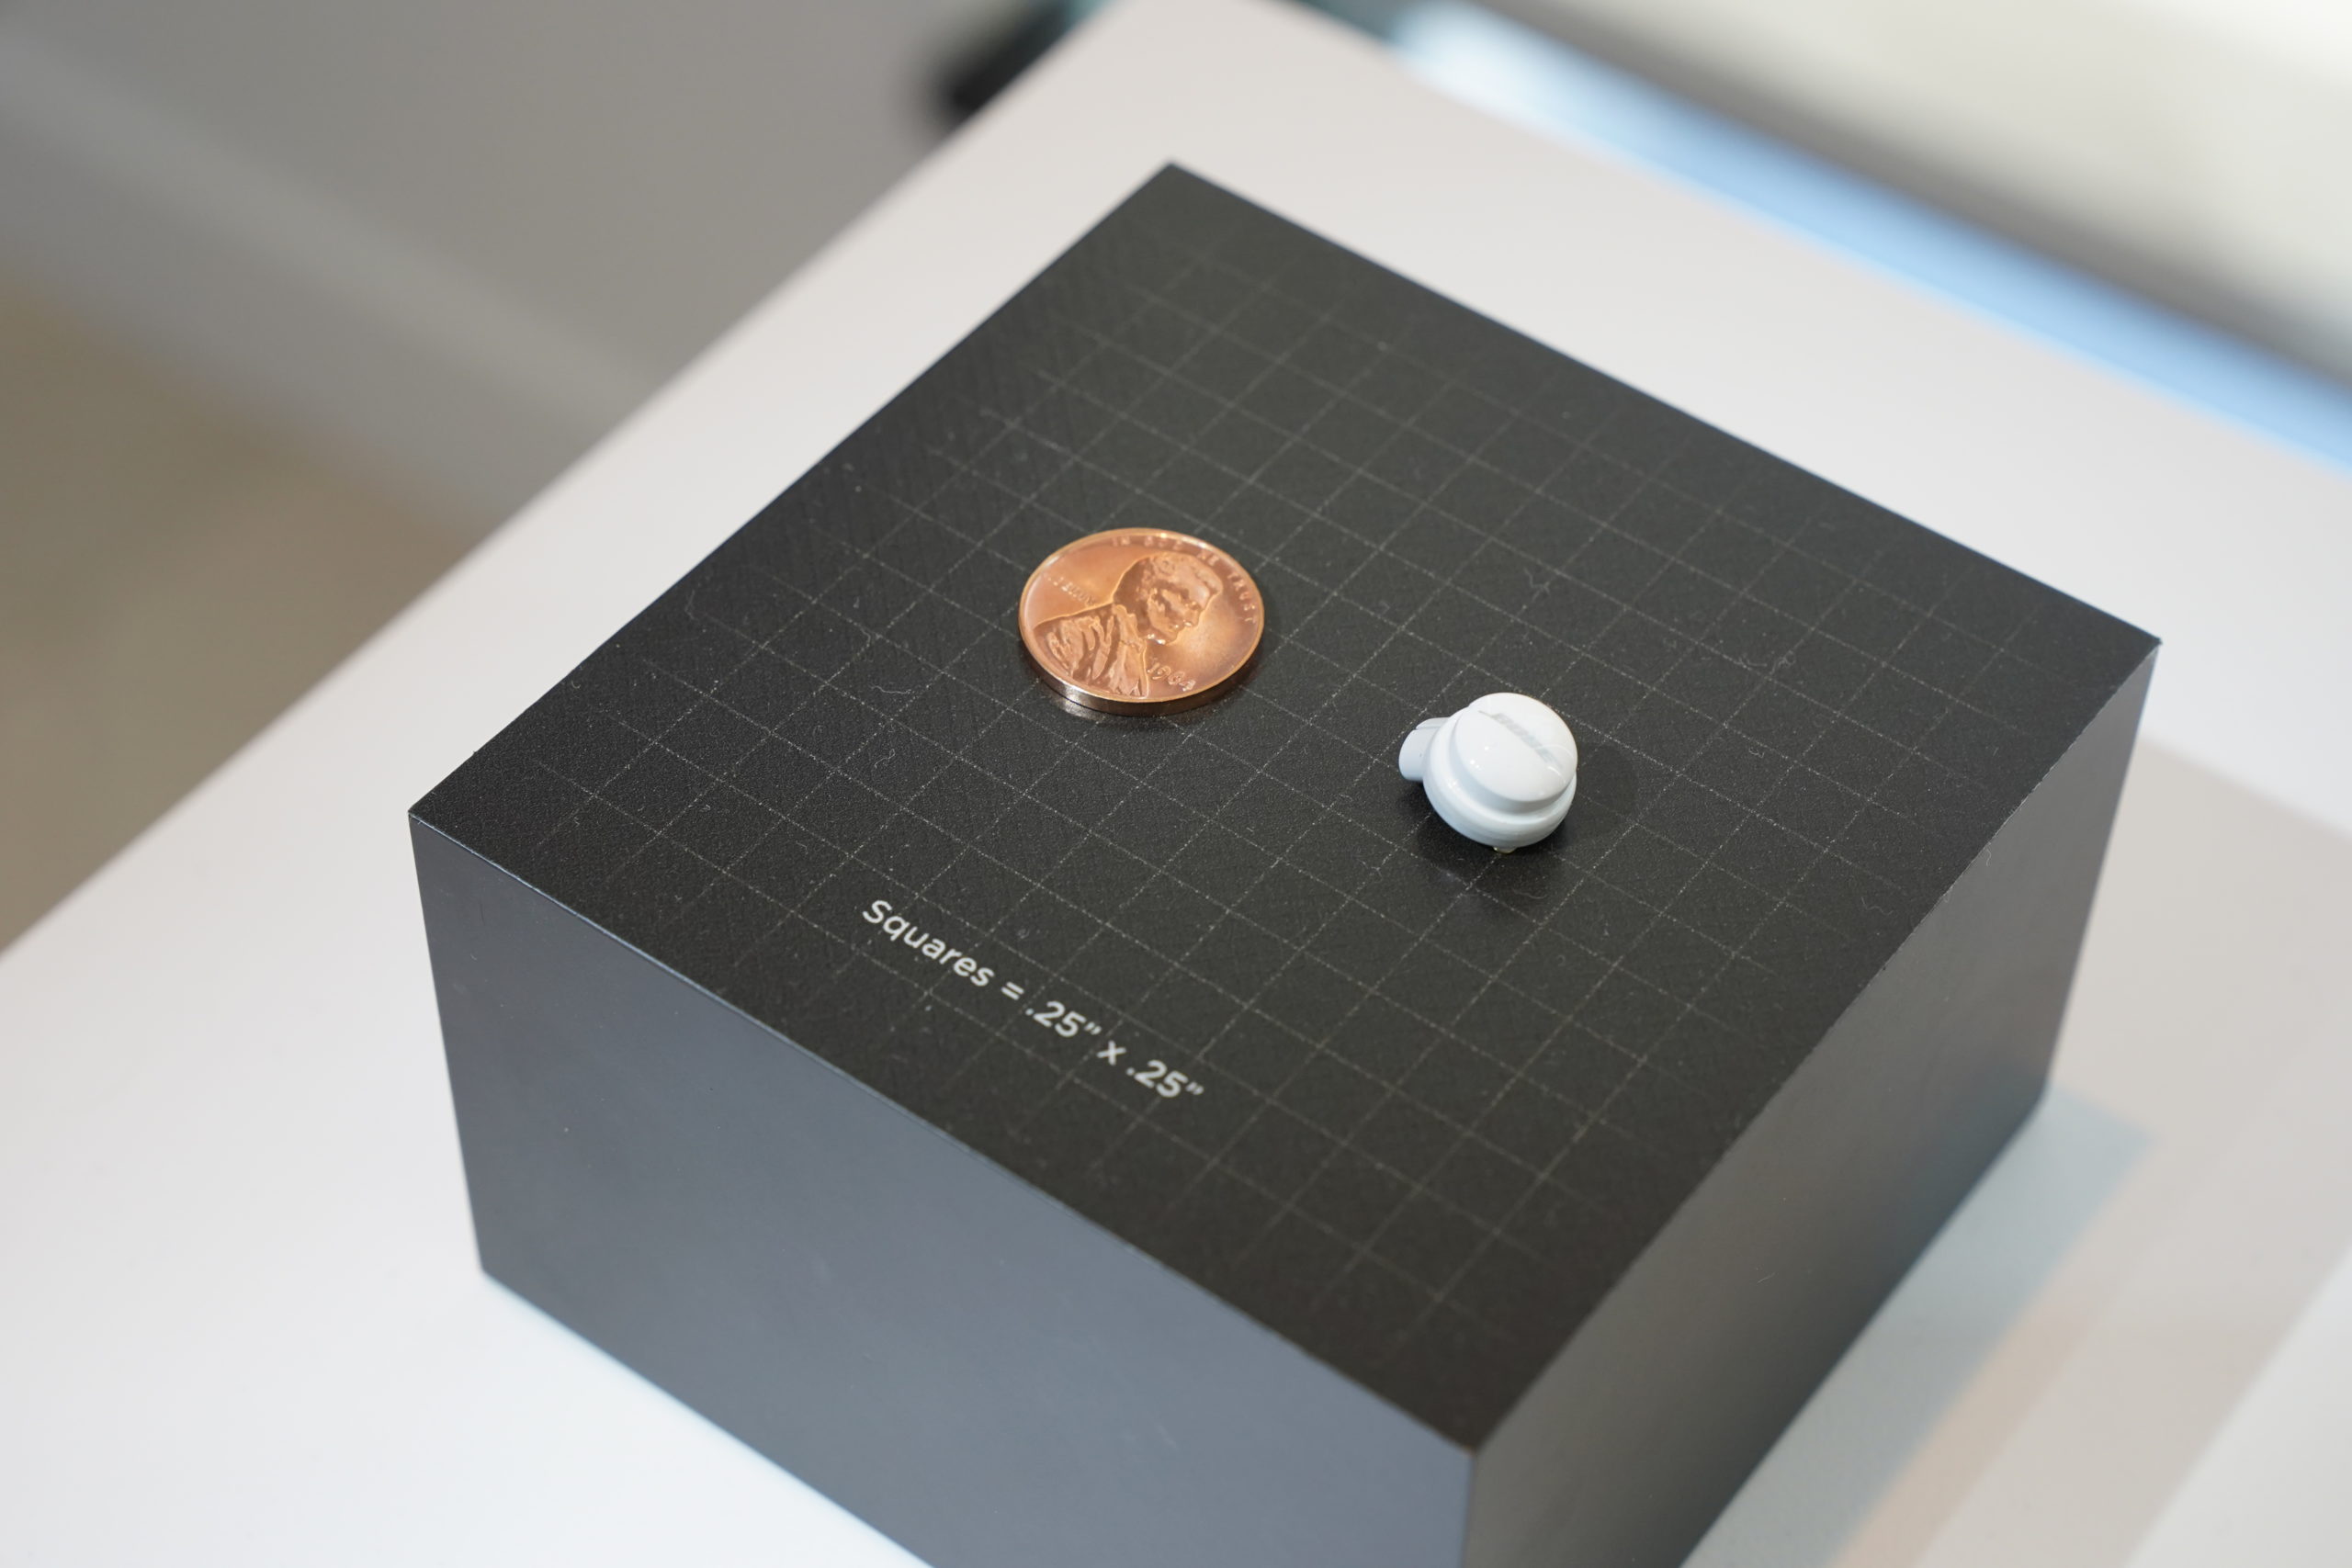 Bose Made A White Noise Machine You Stick In Your Ears